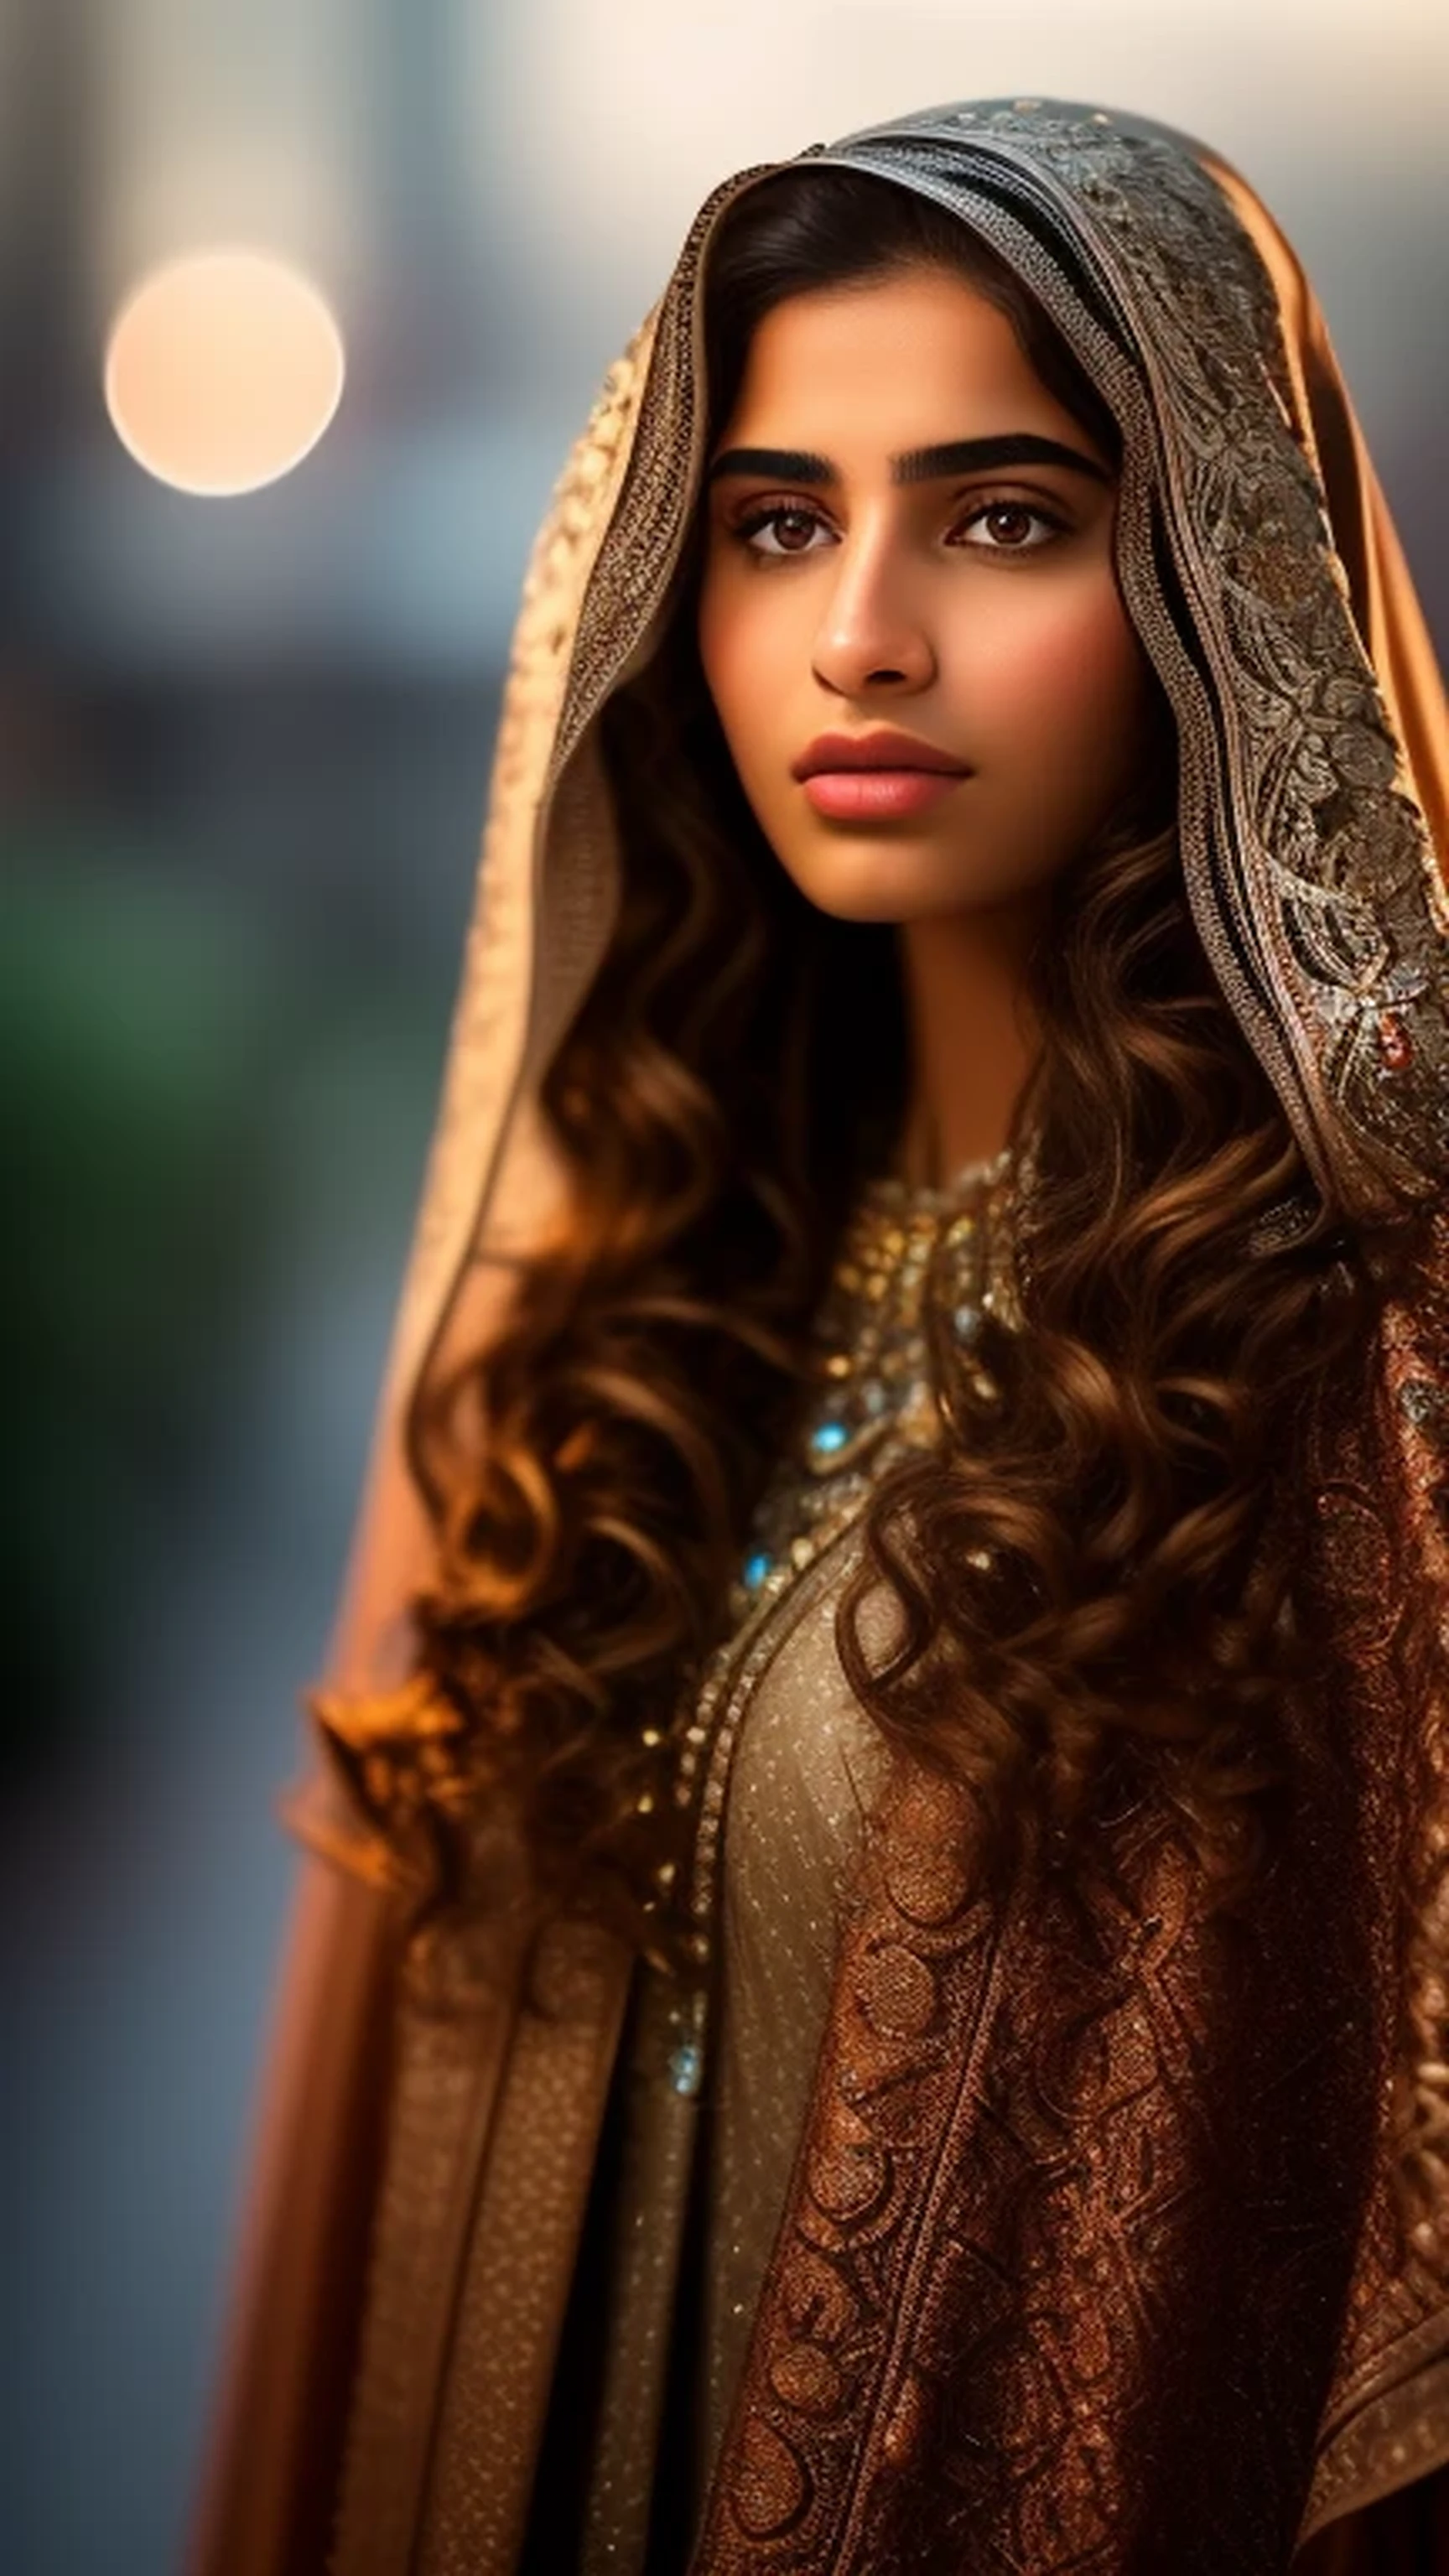 Gorgeous 15-year-old Arabic woman, stand...